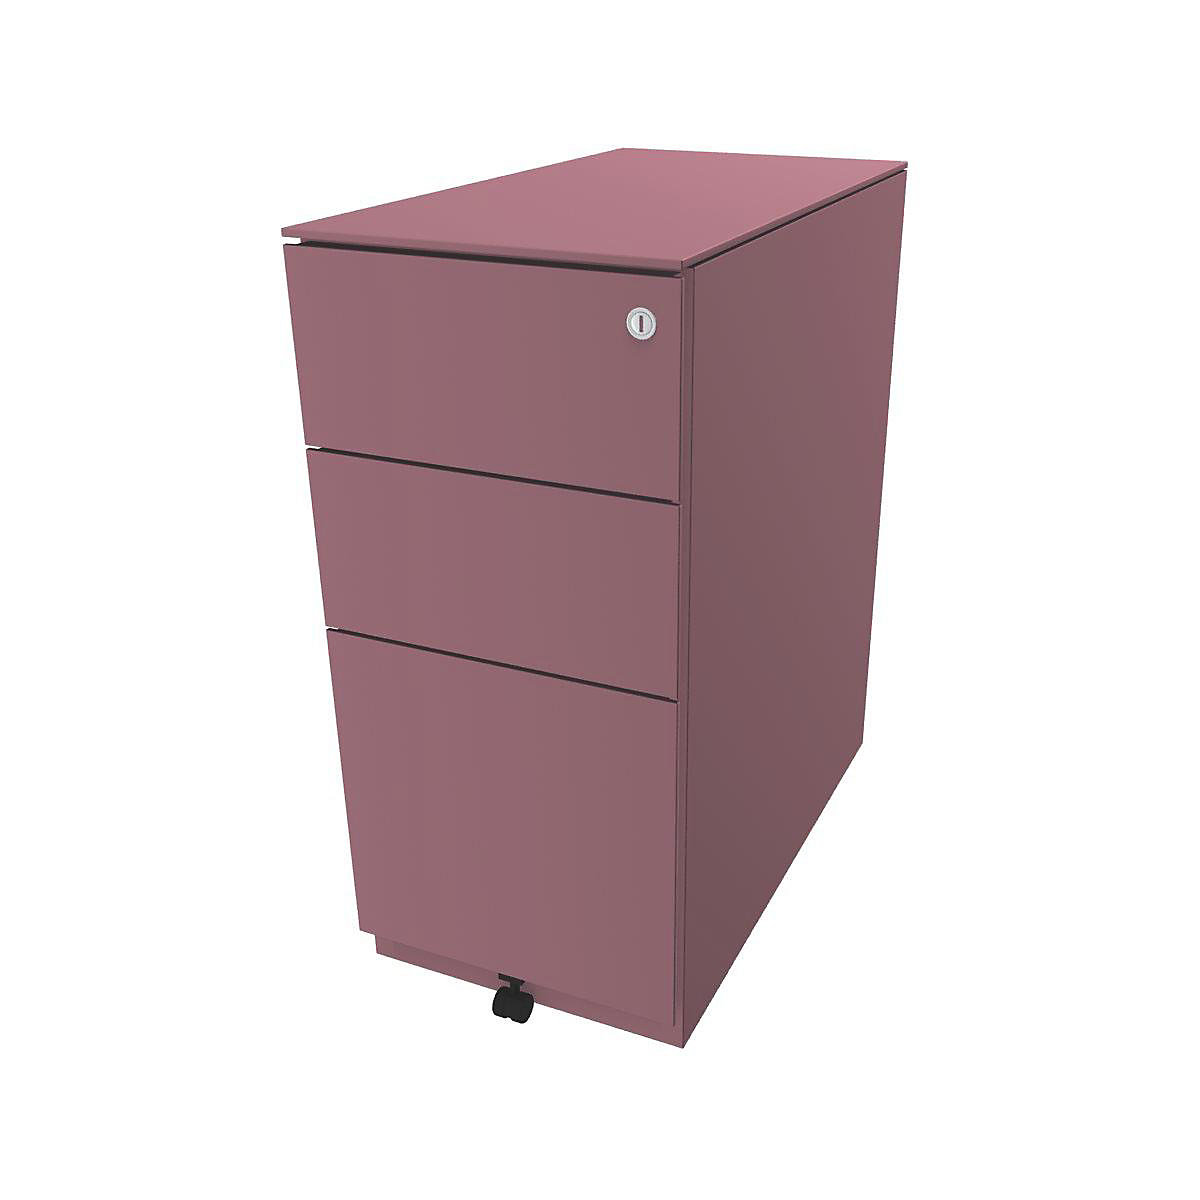 Note™ mobile drawer unit, with 2 universal drawers, 1 suspension file drawer - BISLEY